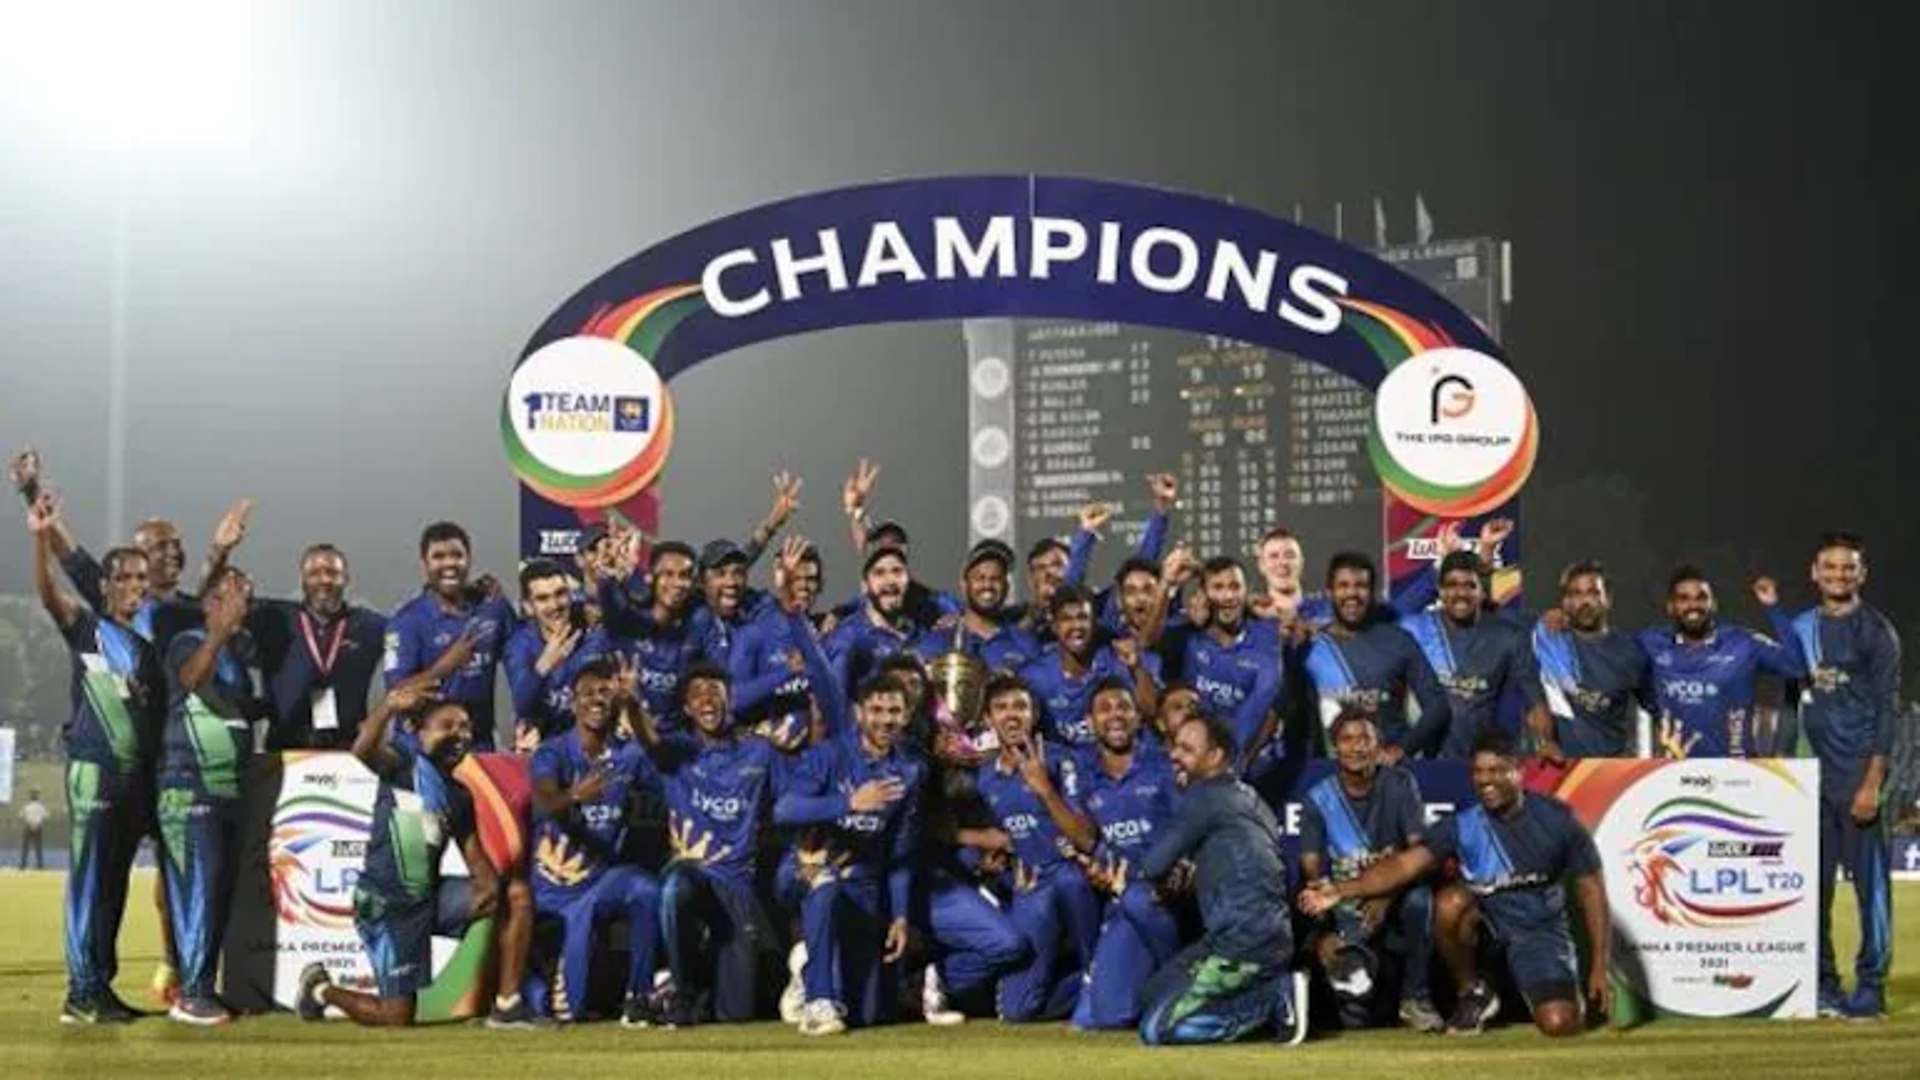 Lankan Premier League 2022 LIVE Streaming, When and Where to Watch